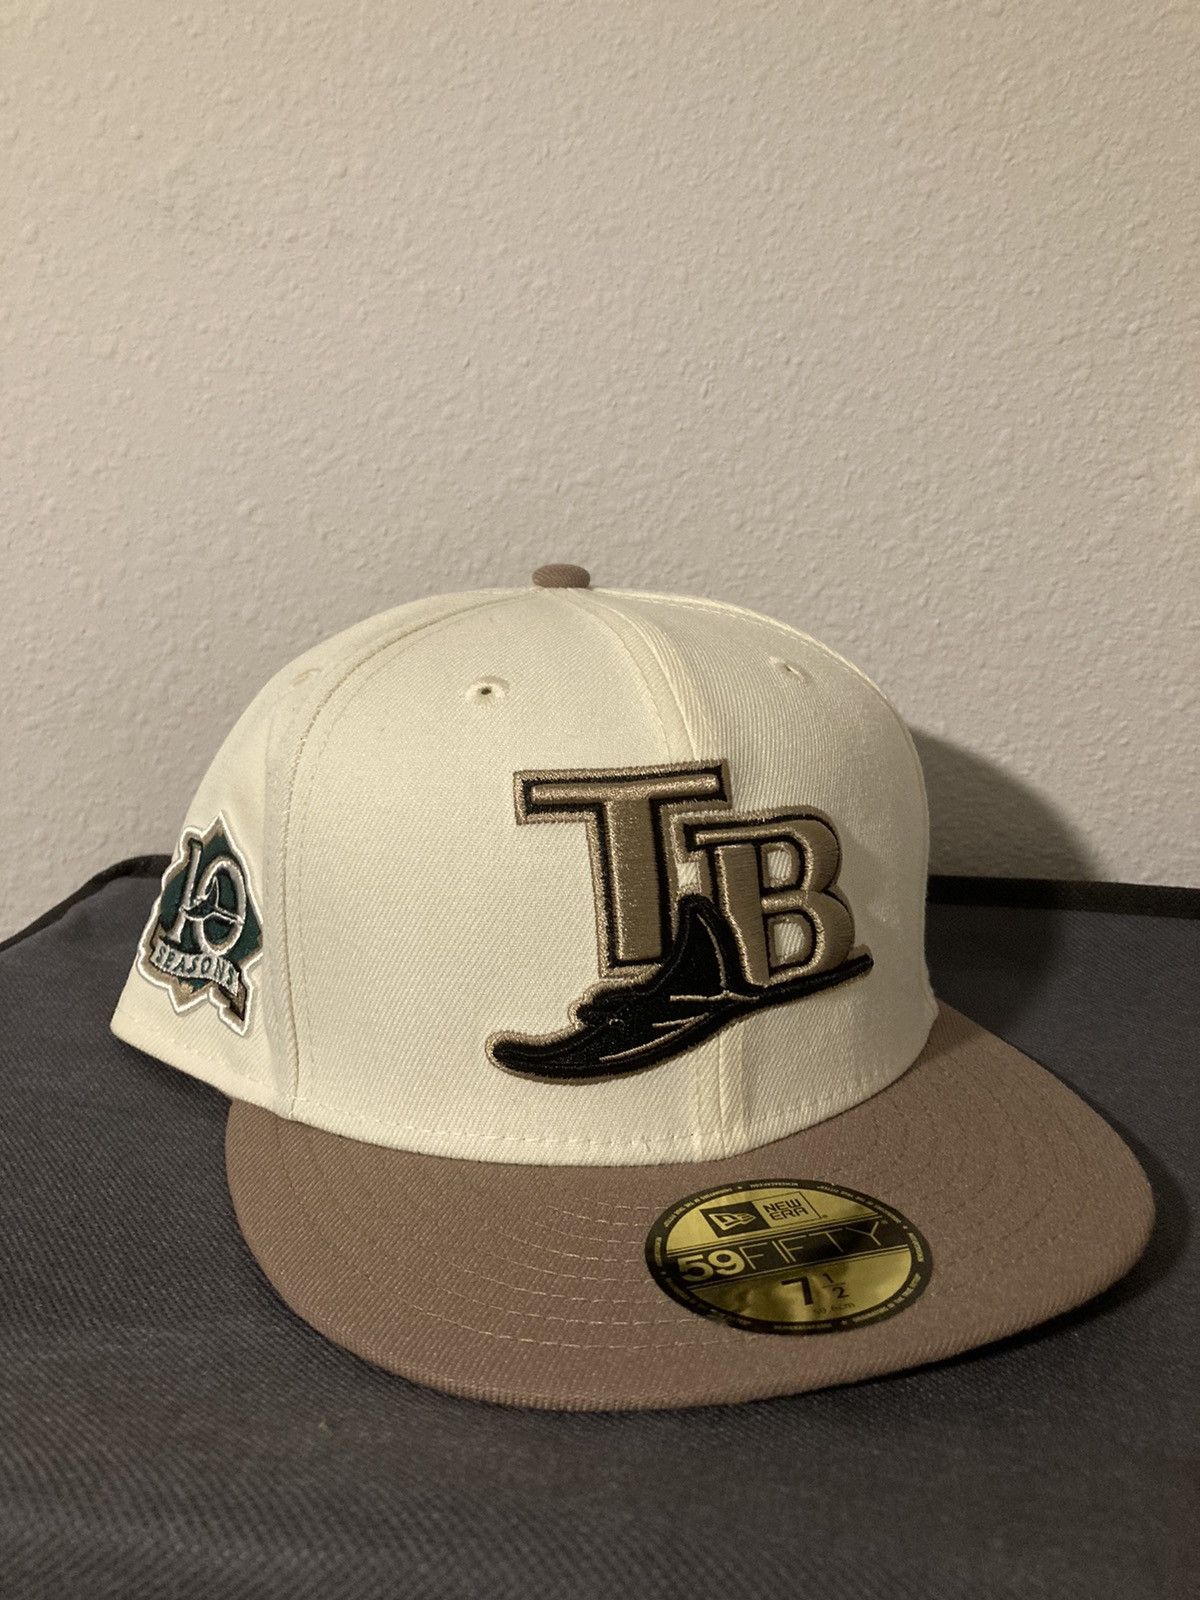 Size 7 1/2- Lids Hat Drop "Lights Out" Collection Tampa Bay Rays  New Era 59Fifty